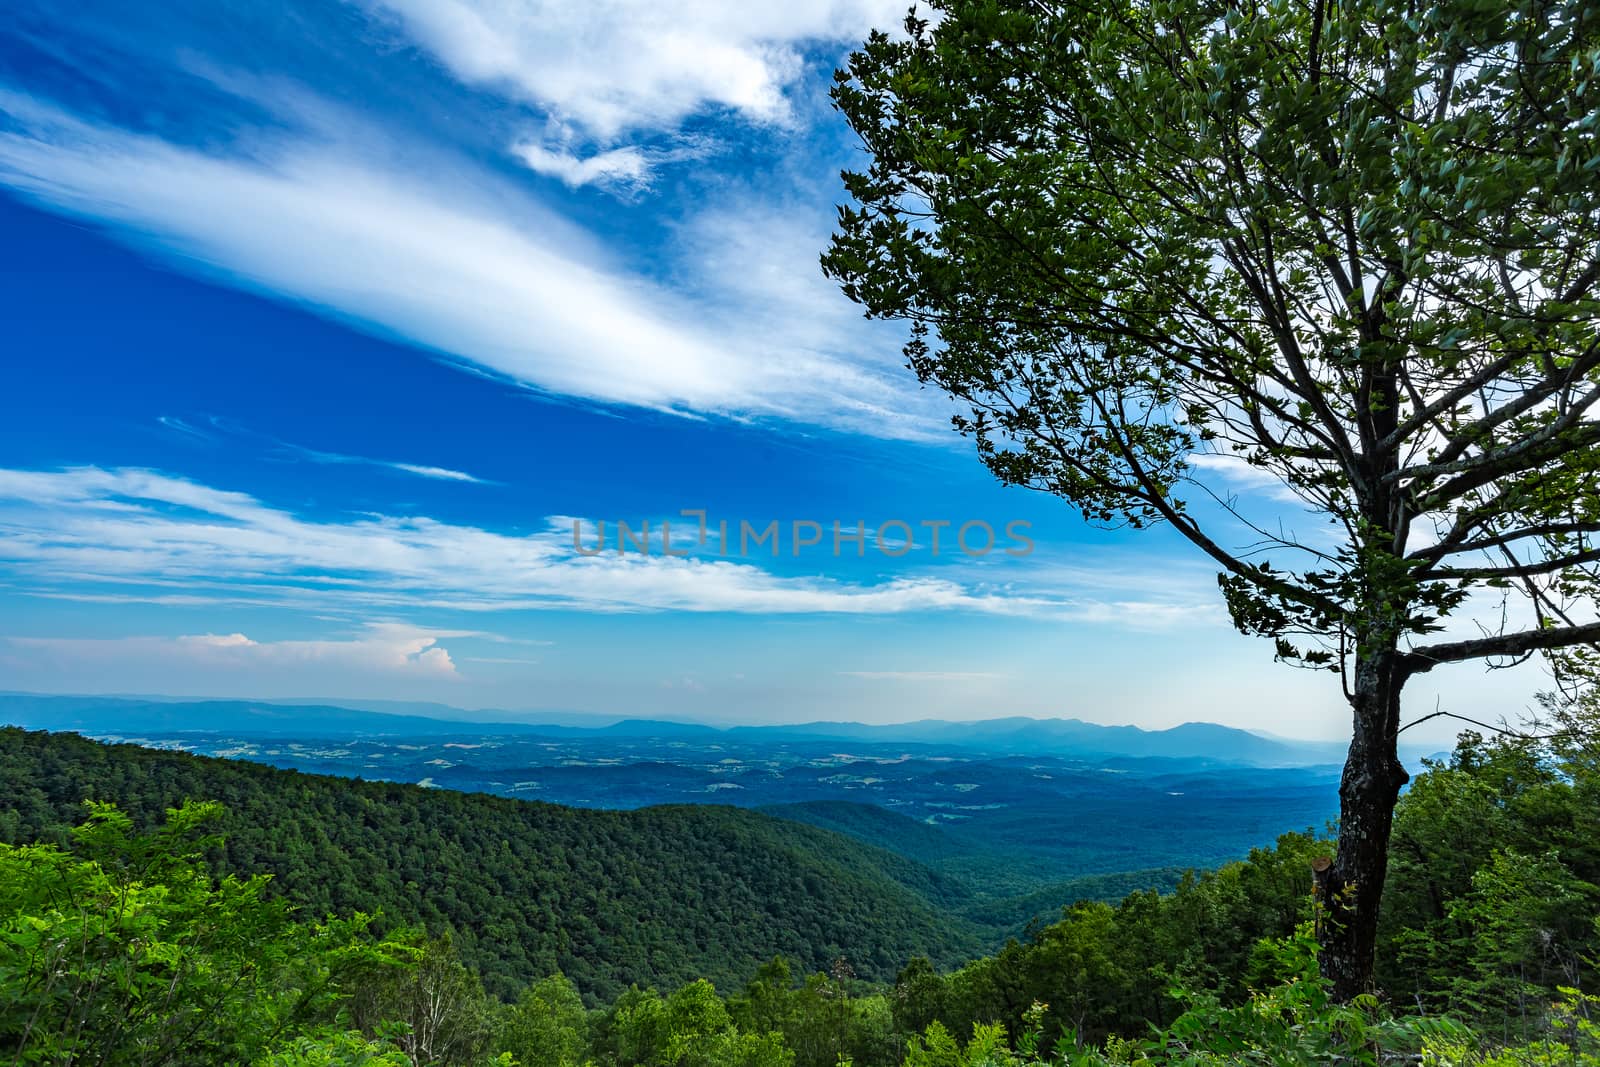 The Blue Ridge Parkway offers mountain scenery while traveling thropught the Appalachians.